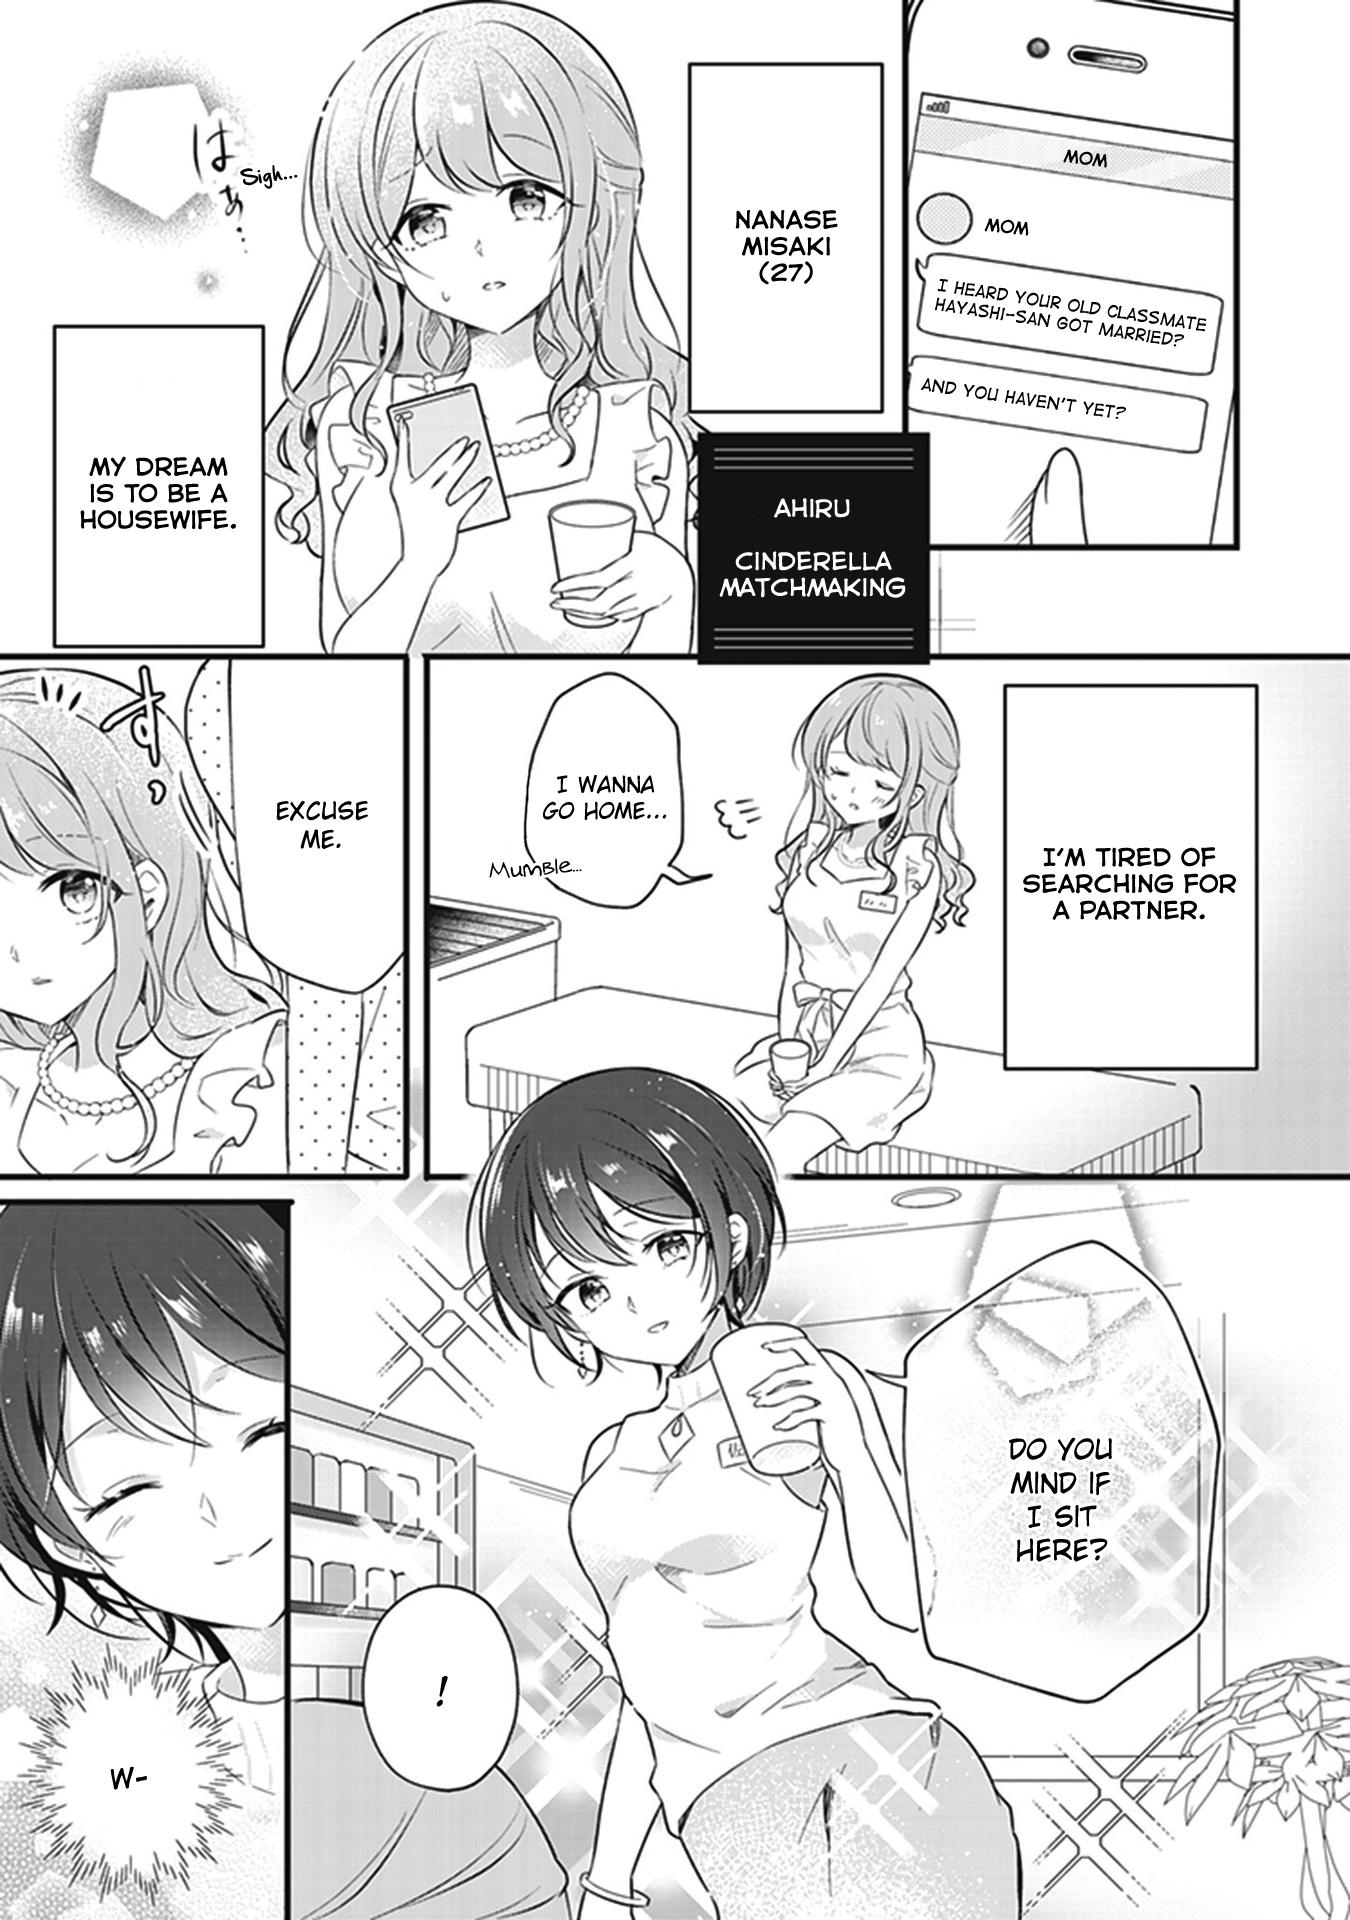 White Lilies In Love Bride's Newlywed Yuri Anthology Vol.1 Chapter 4